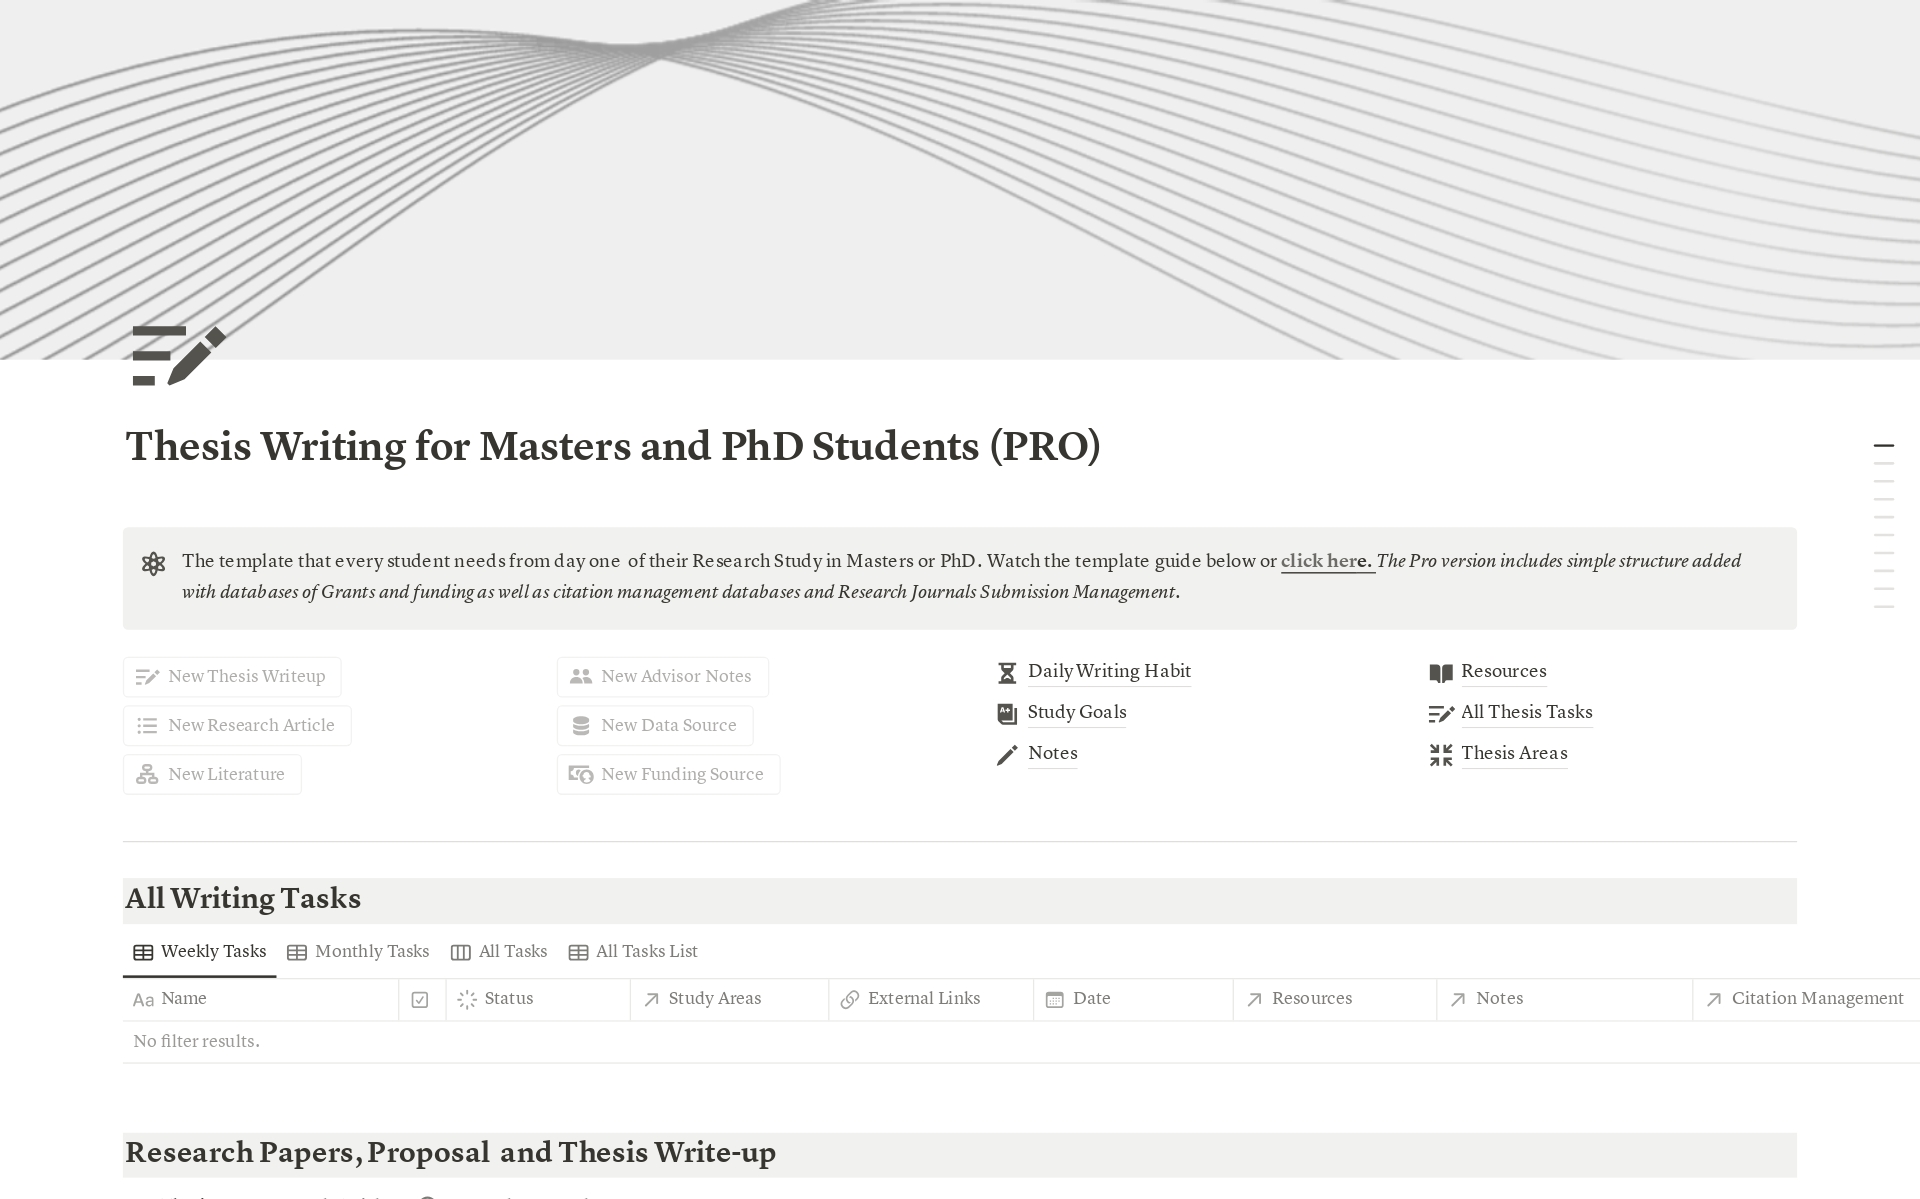 Thesis writing for Masters and PhD Students (PRO)님의 템플릿 미리보기